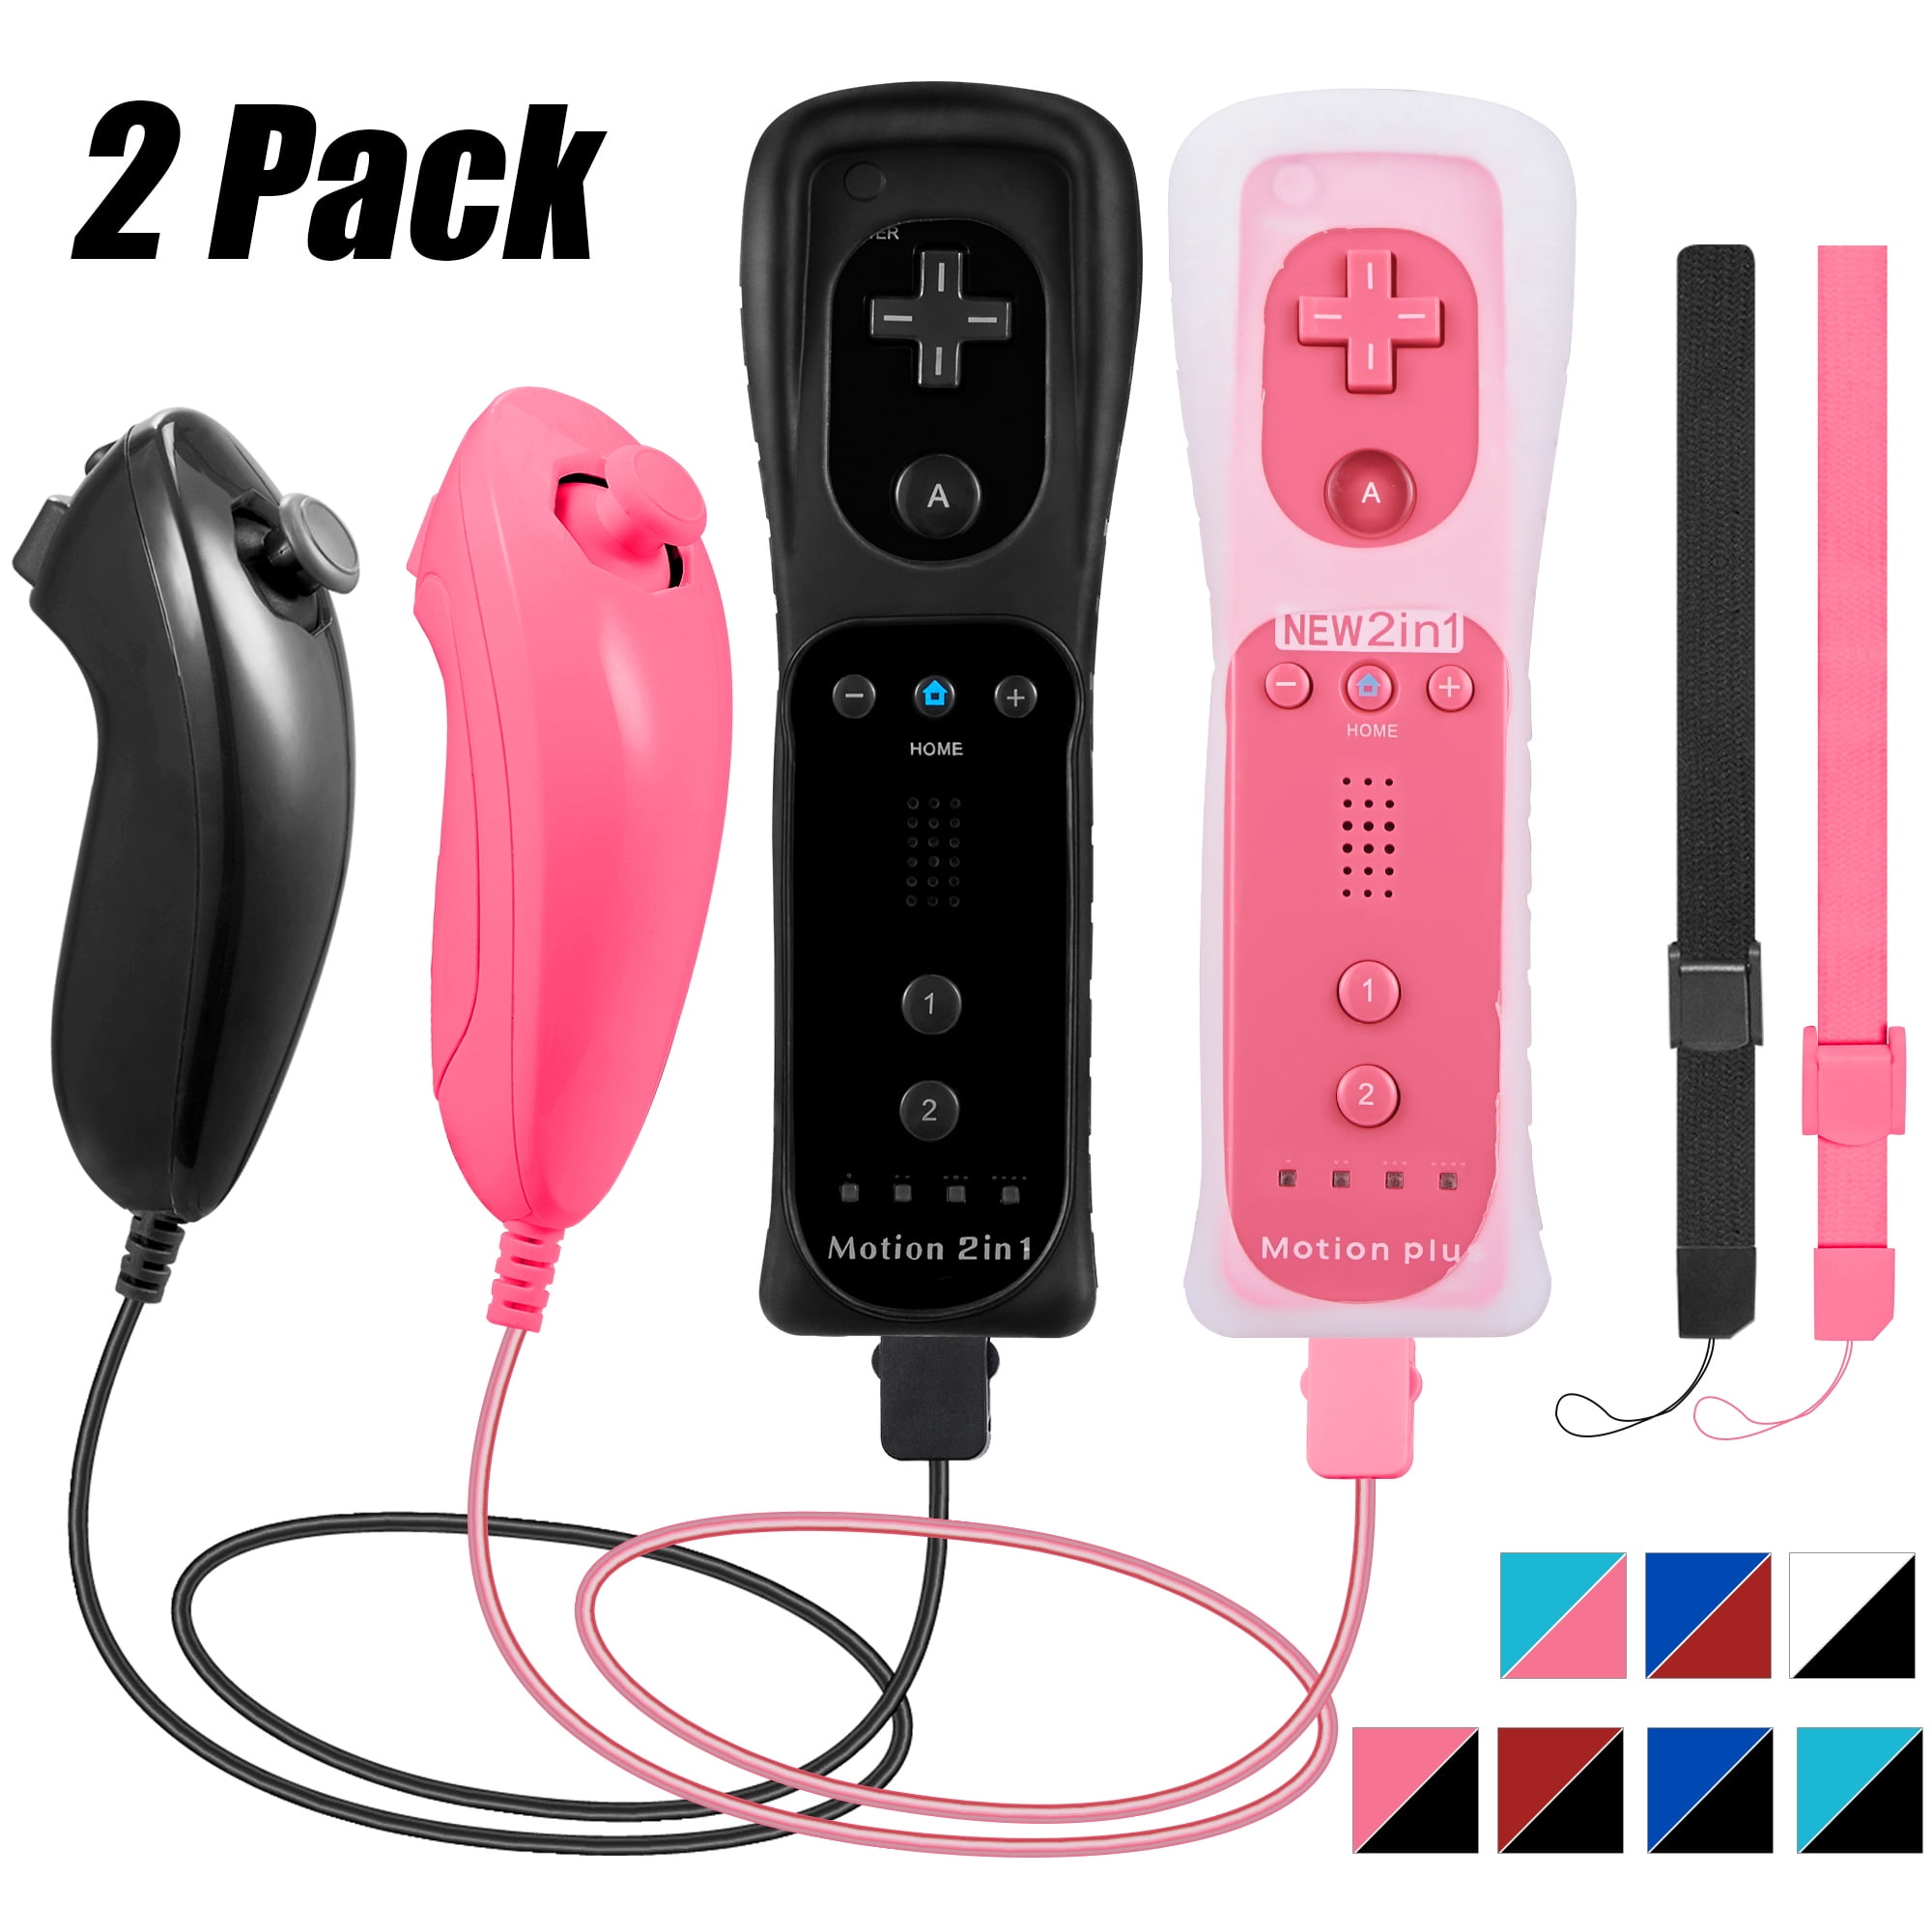 Wii Remote Nunchuck Controller, Wii Controller Motion Plus